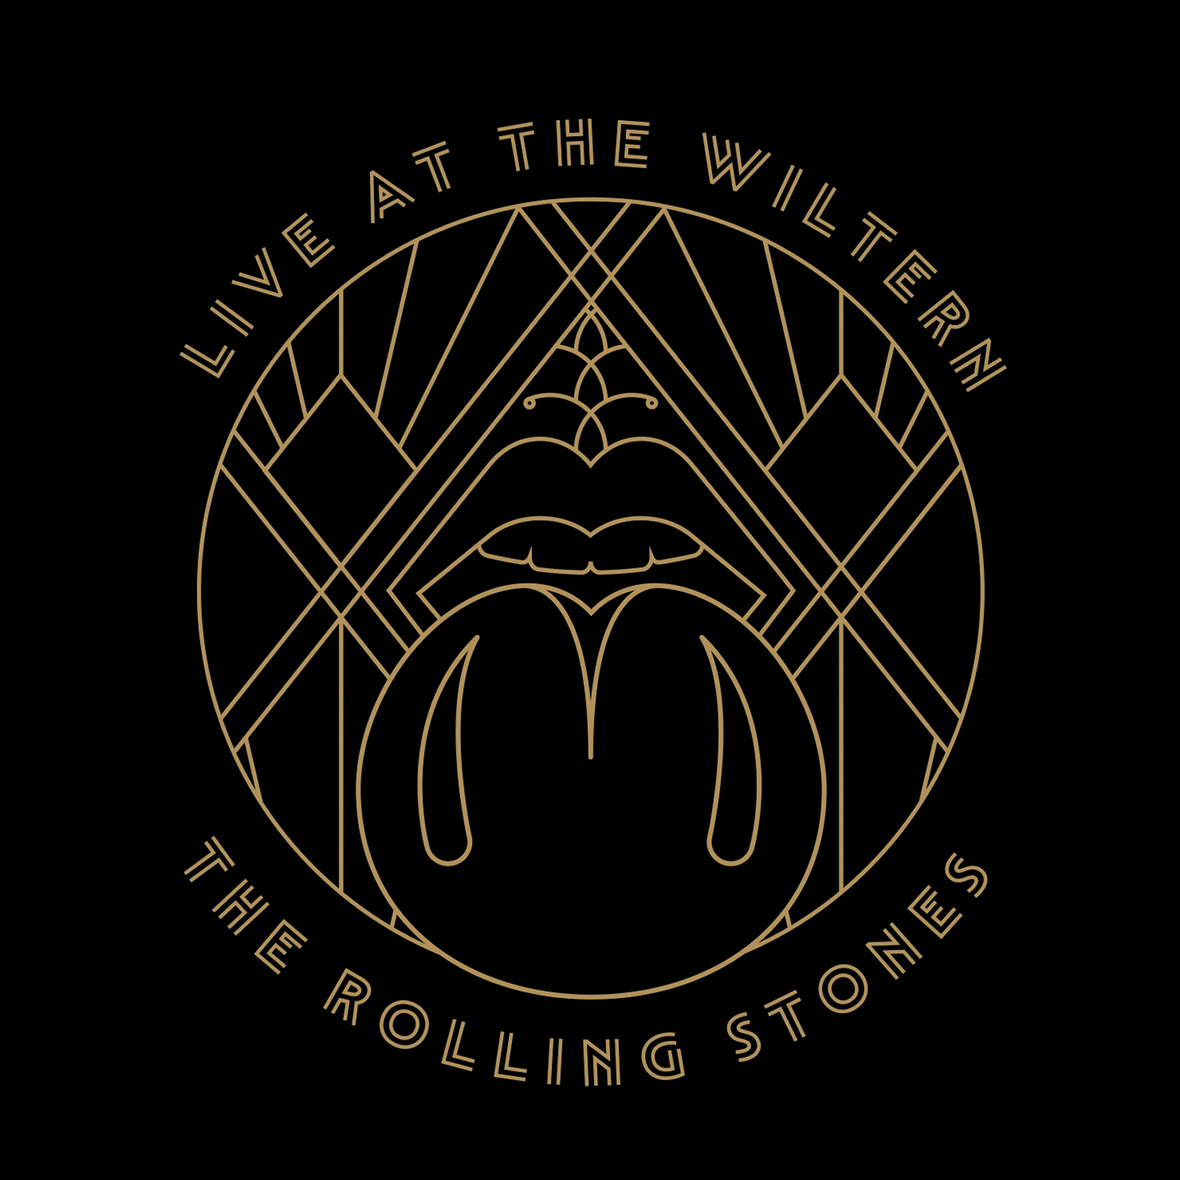 The Rolling Stones - Live At The Wiltern Blu-ray